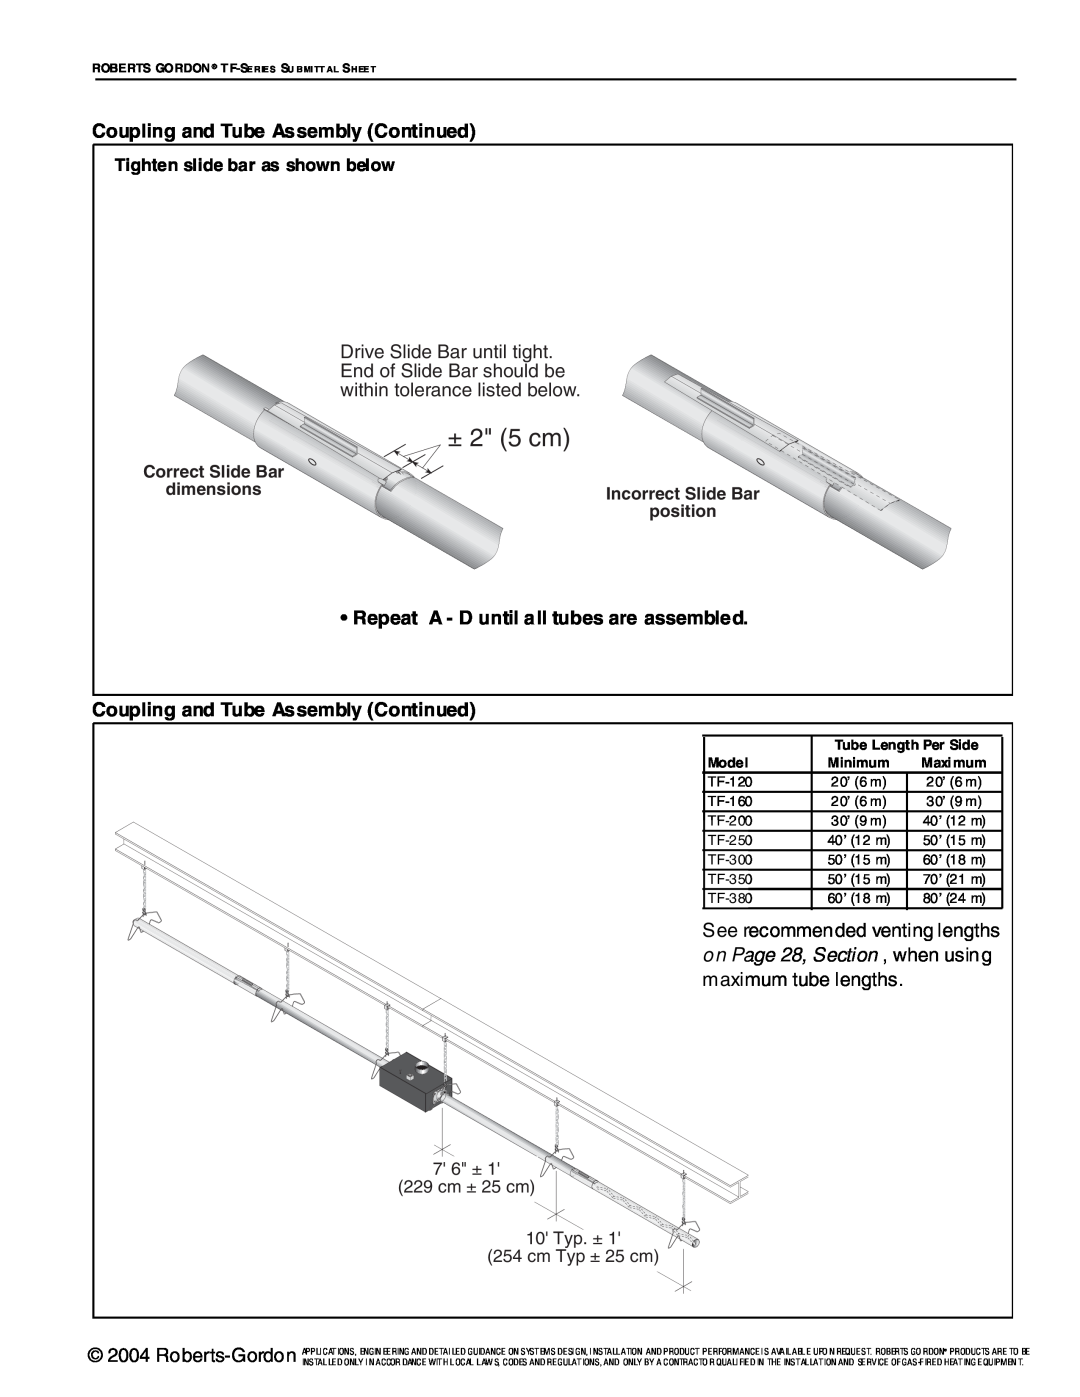 Roberts Gorden TF-Series ± 2 5 cm, on Page 28, Section , when using, Tighten slide bar as shown below, dimensions 